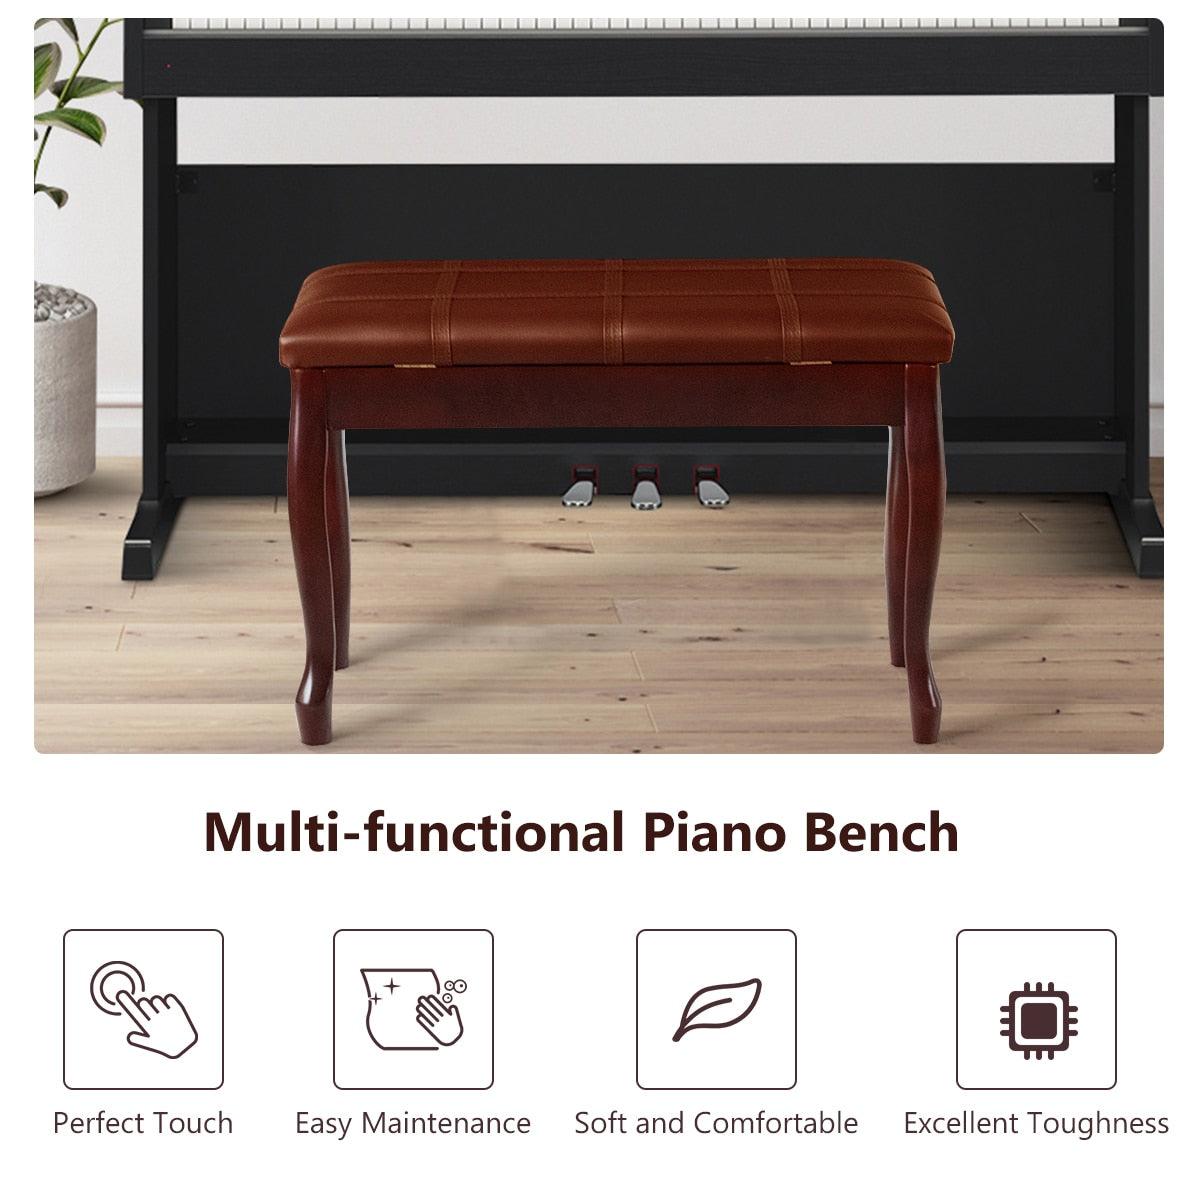 Solid Wood PU Leather Piano Bench Padded Double Duet Keyboard Seat Storage Brown (FW7)(1U67)